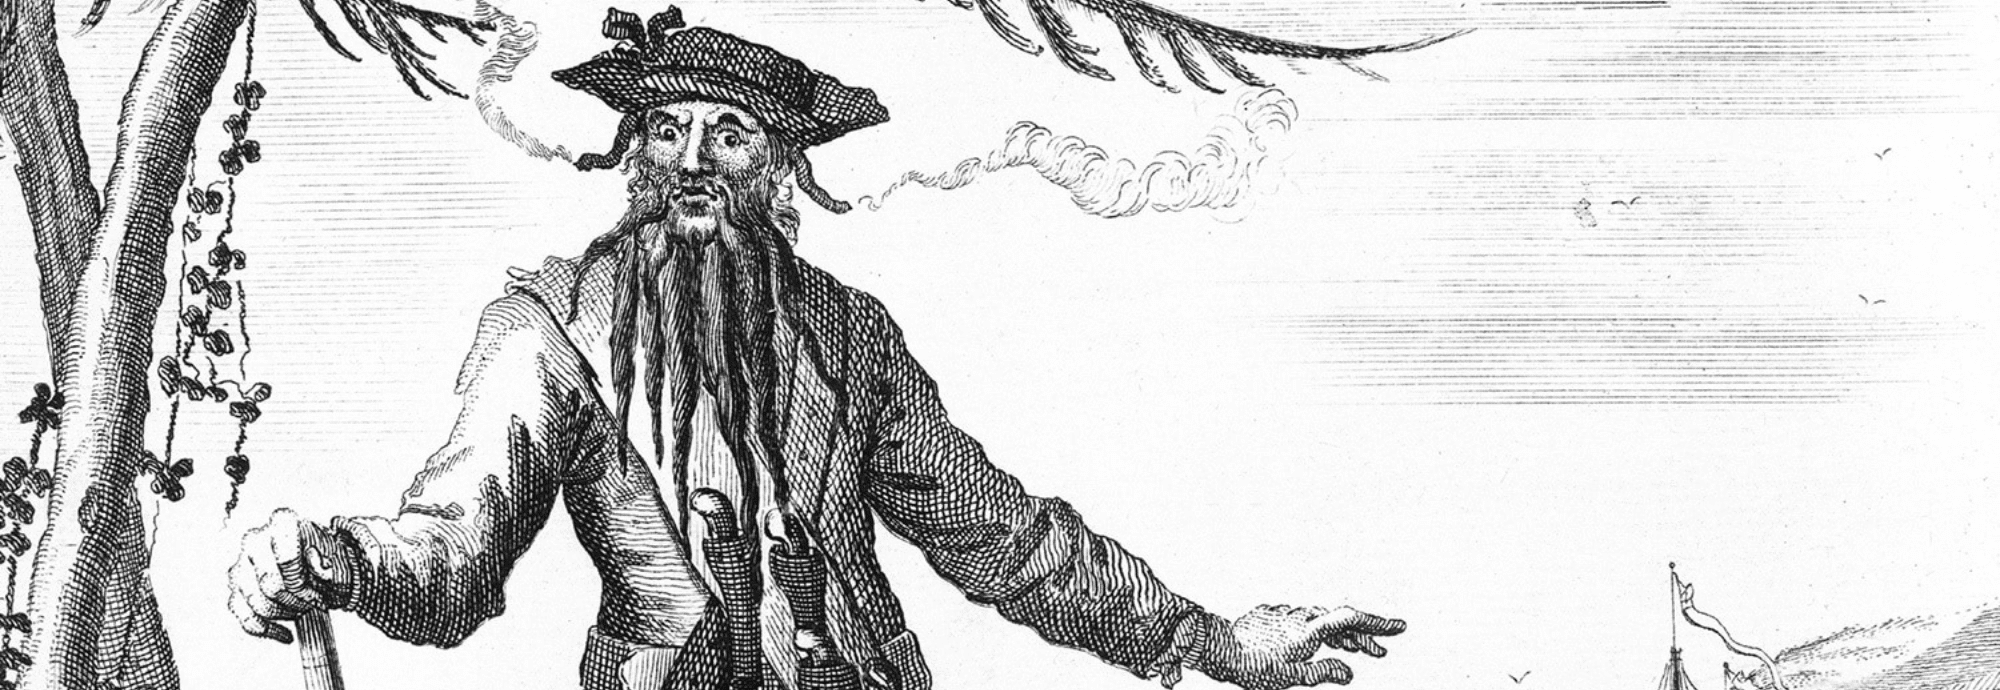 A black and white illustration of Blackbeard on a beach.